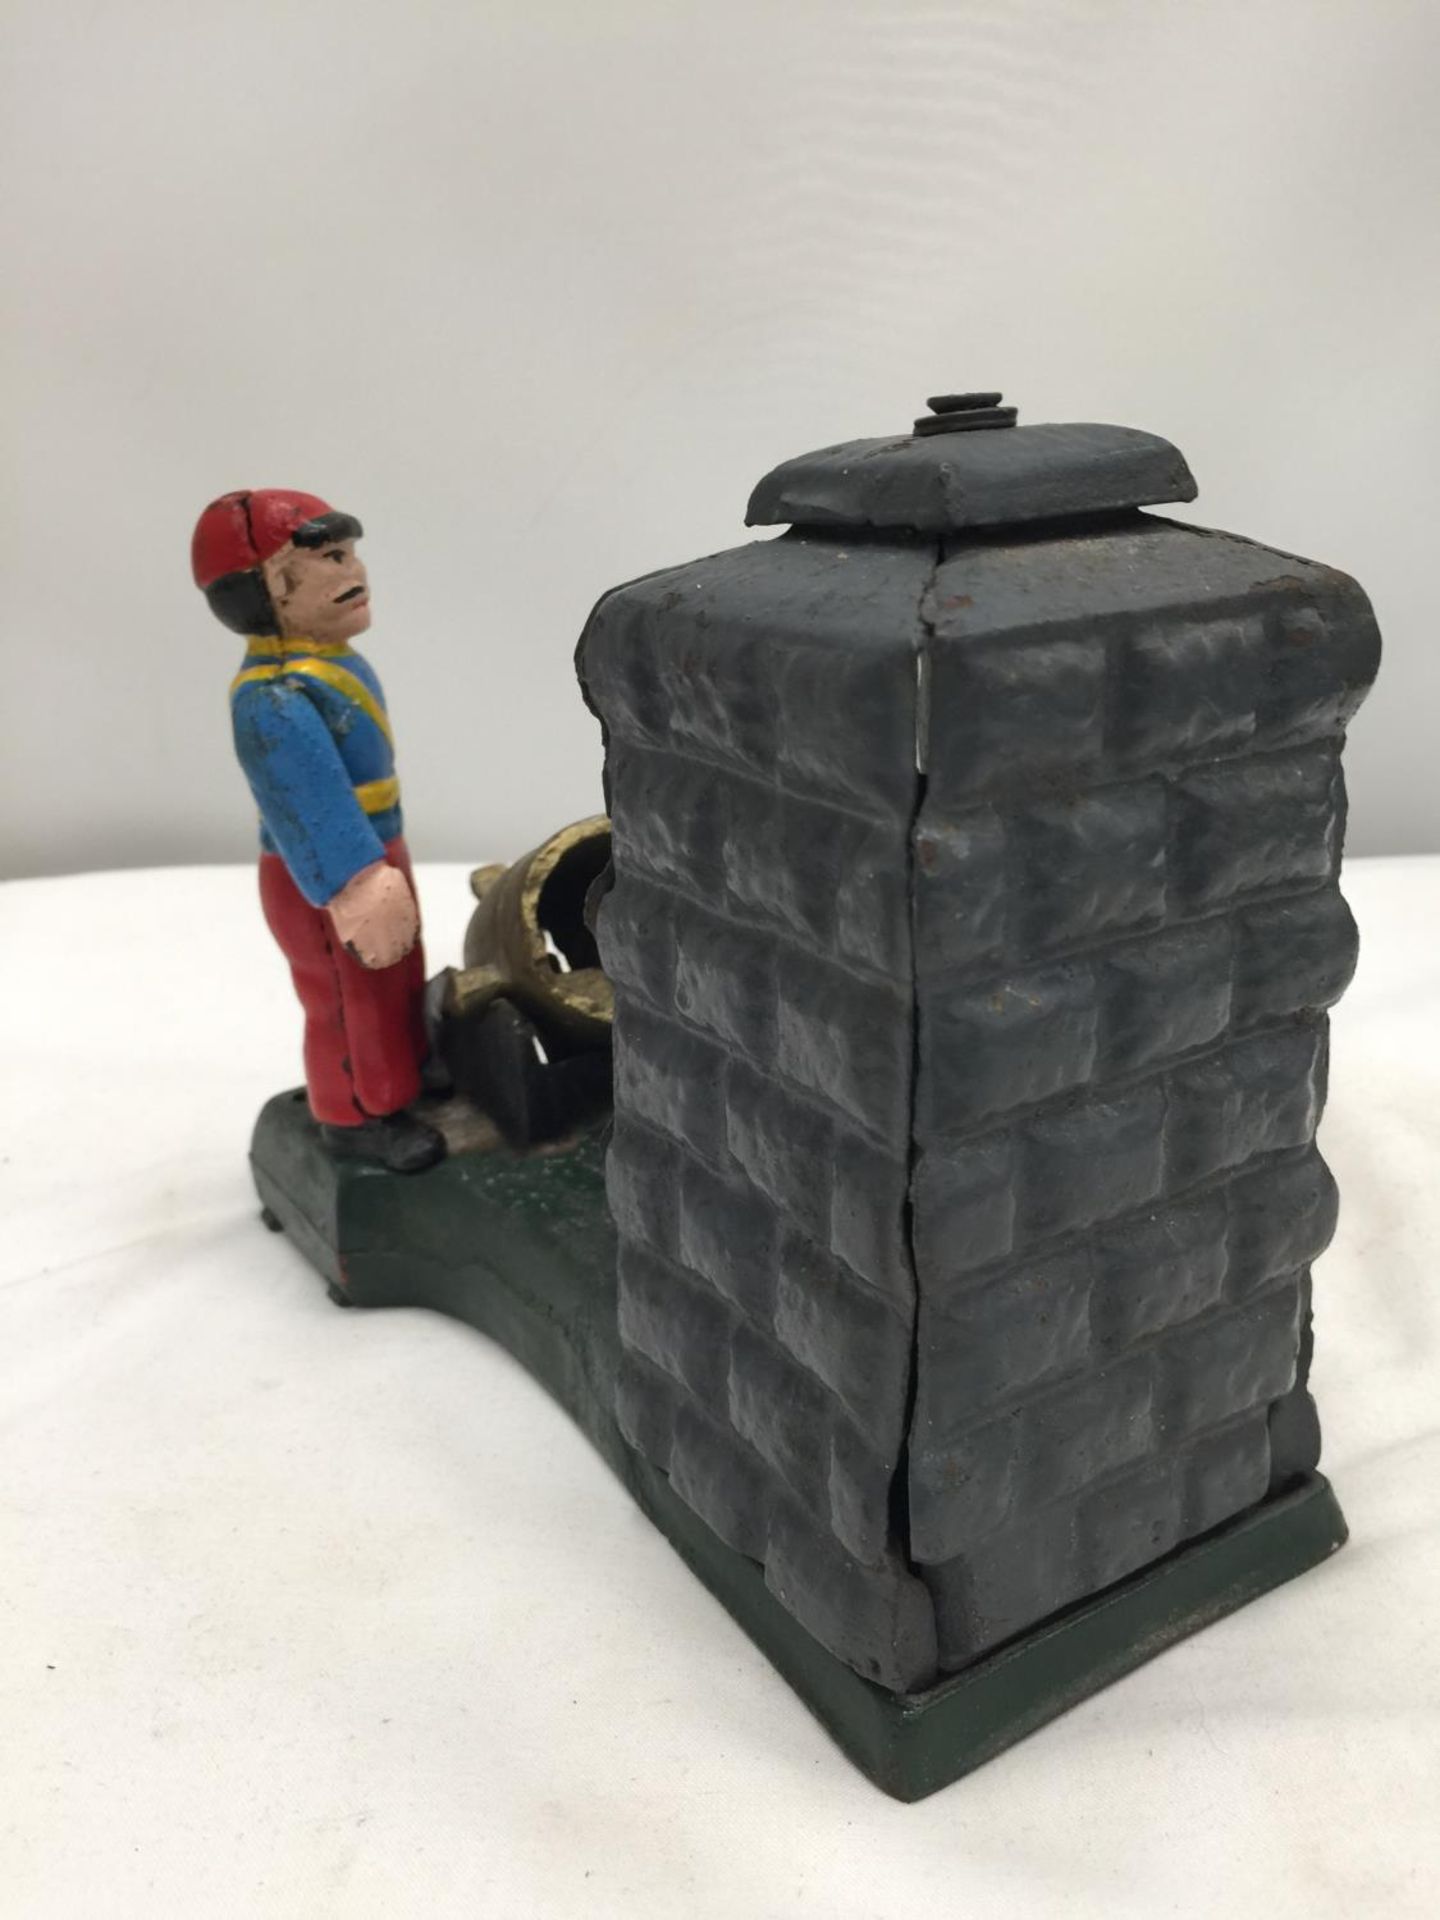 A VINTAGE STYLE CAST MONEY BOX OF A SOLDIER WITH A CANNON - Image 4 of 5